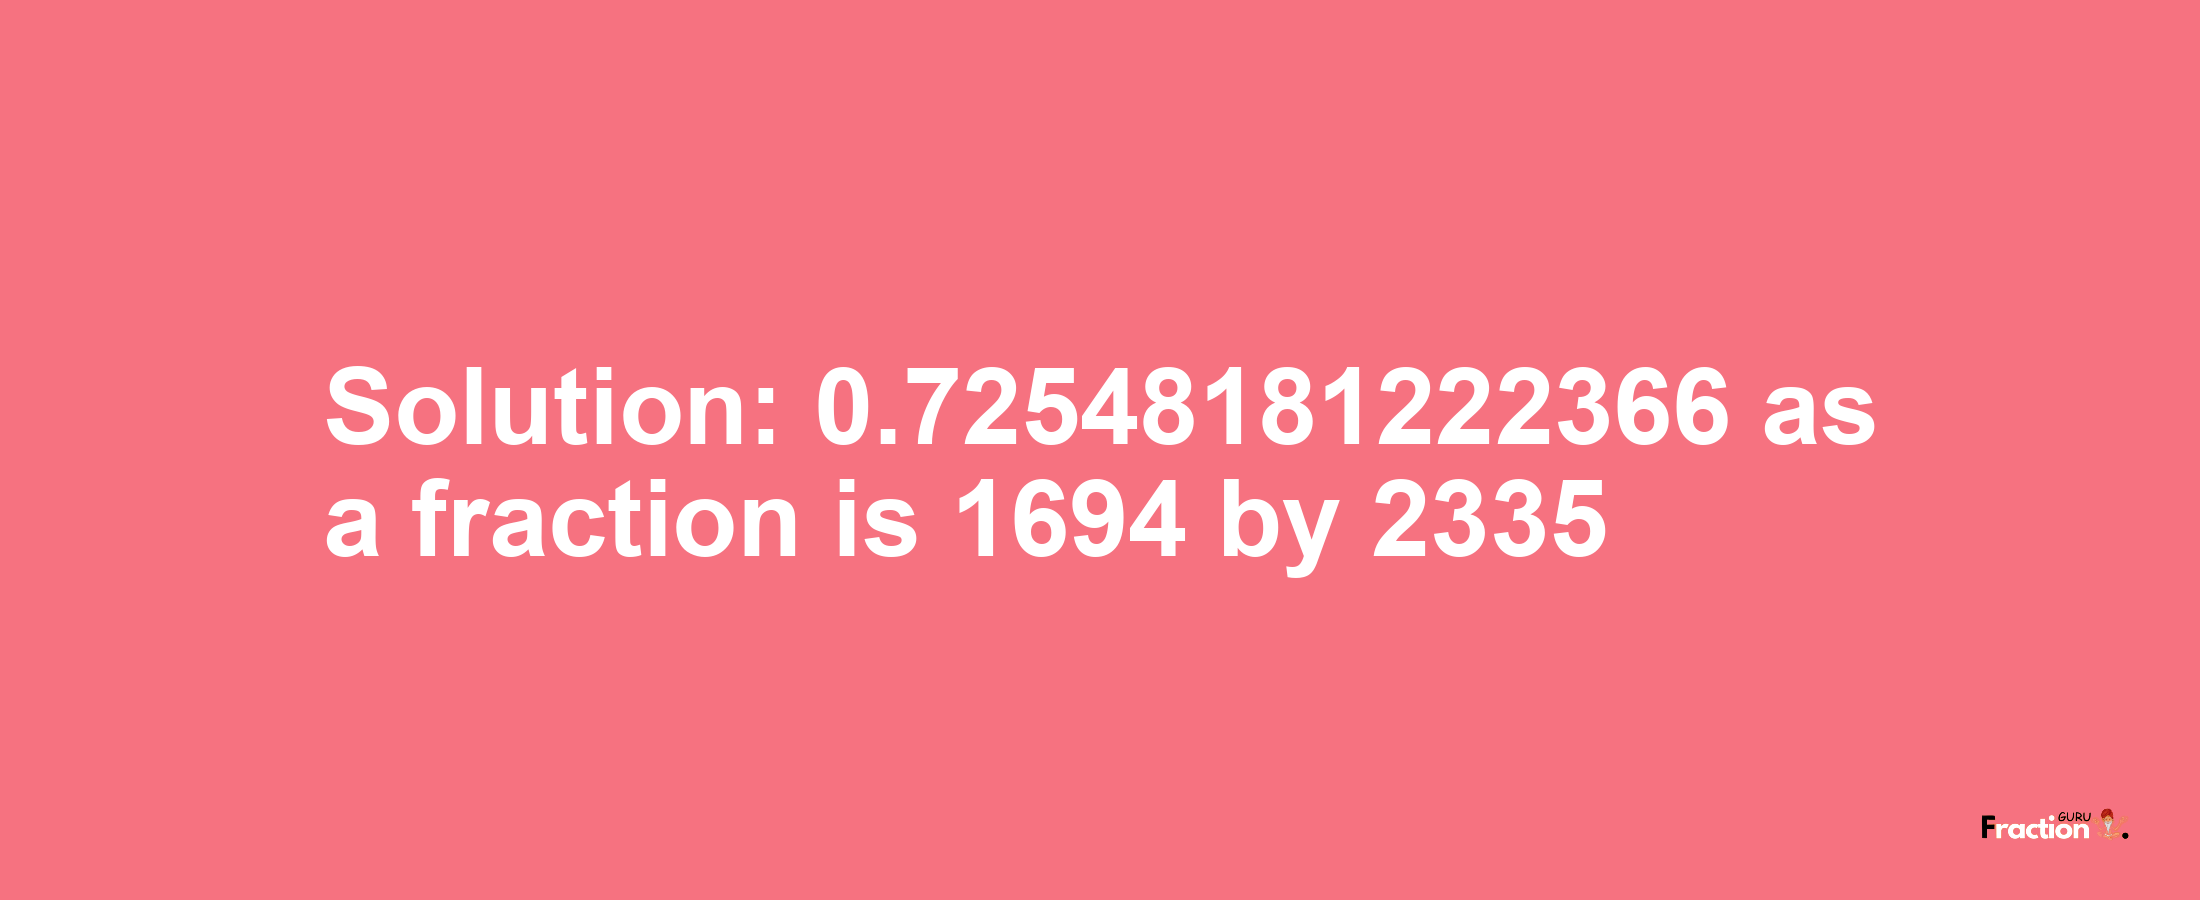 Solution:0.72548181222366 as a fraction is 1694/2335